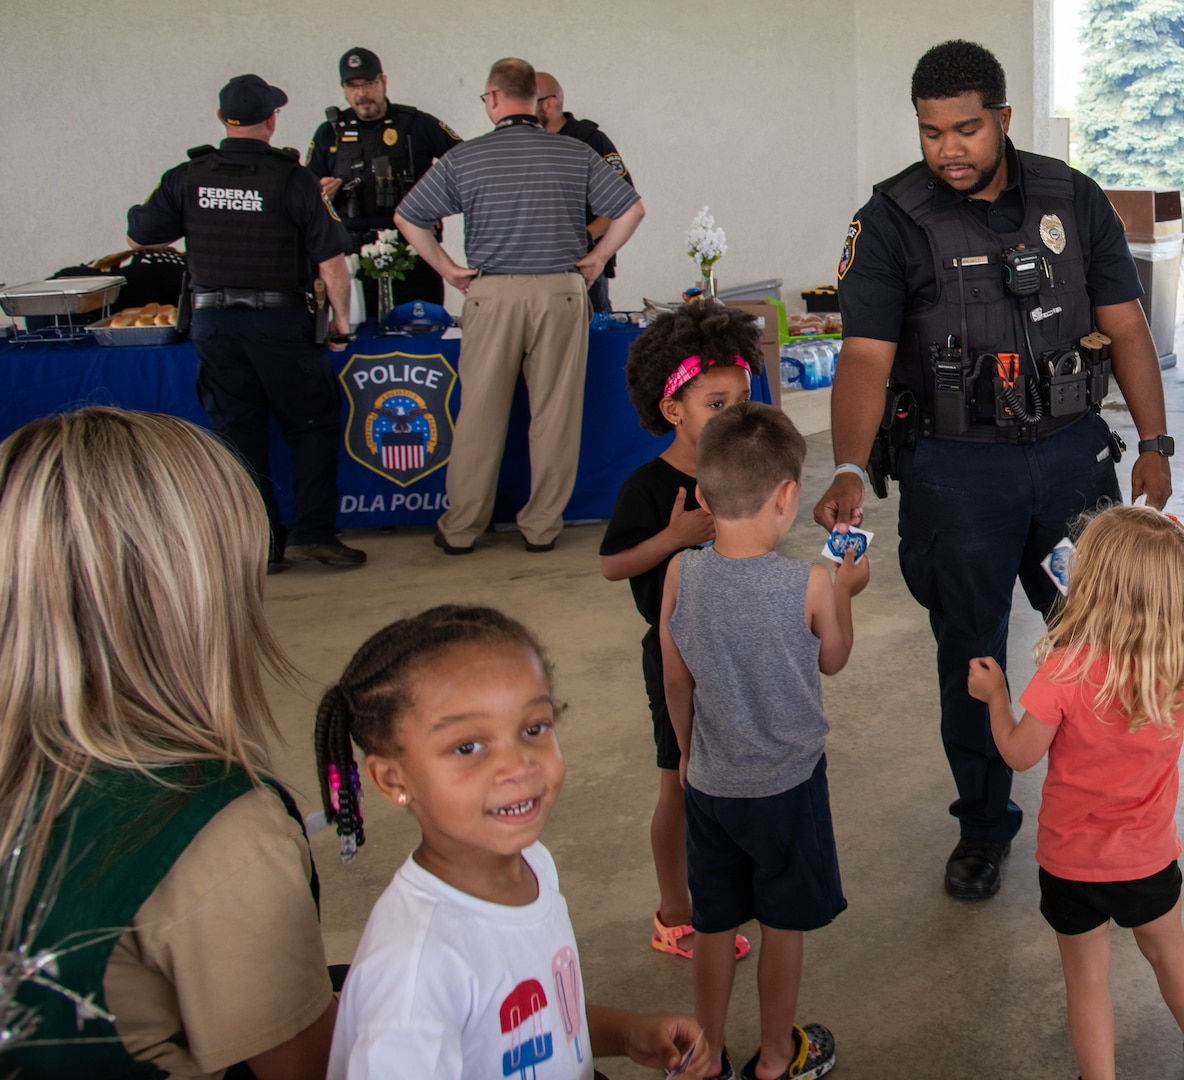 A dark skinned man in a police uniform hands out stickers to several children in a pavilion.